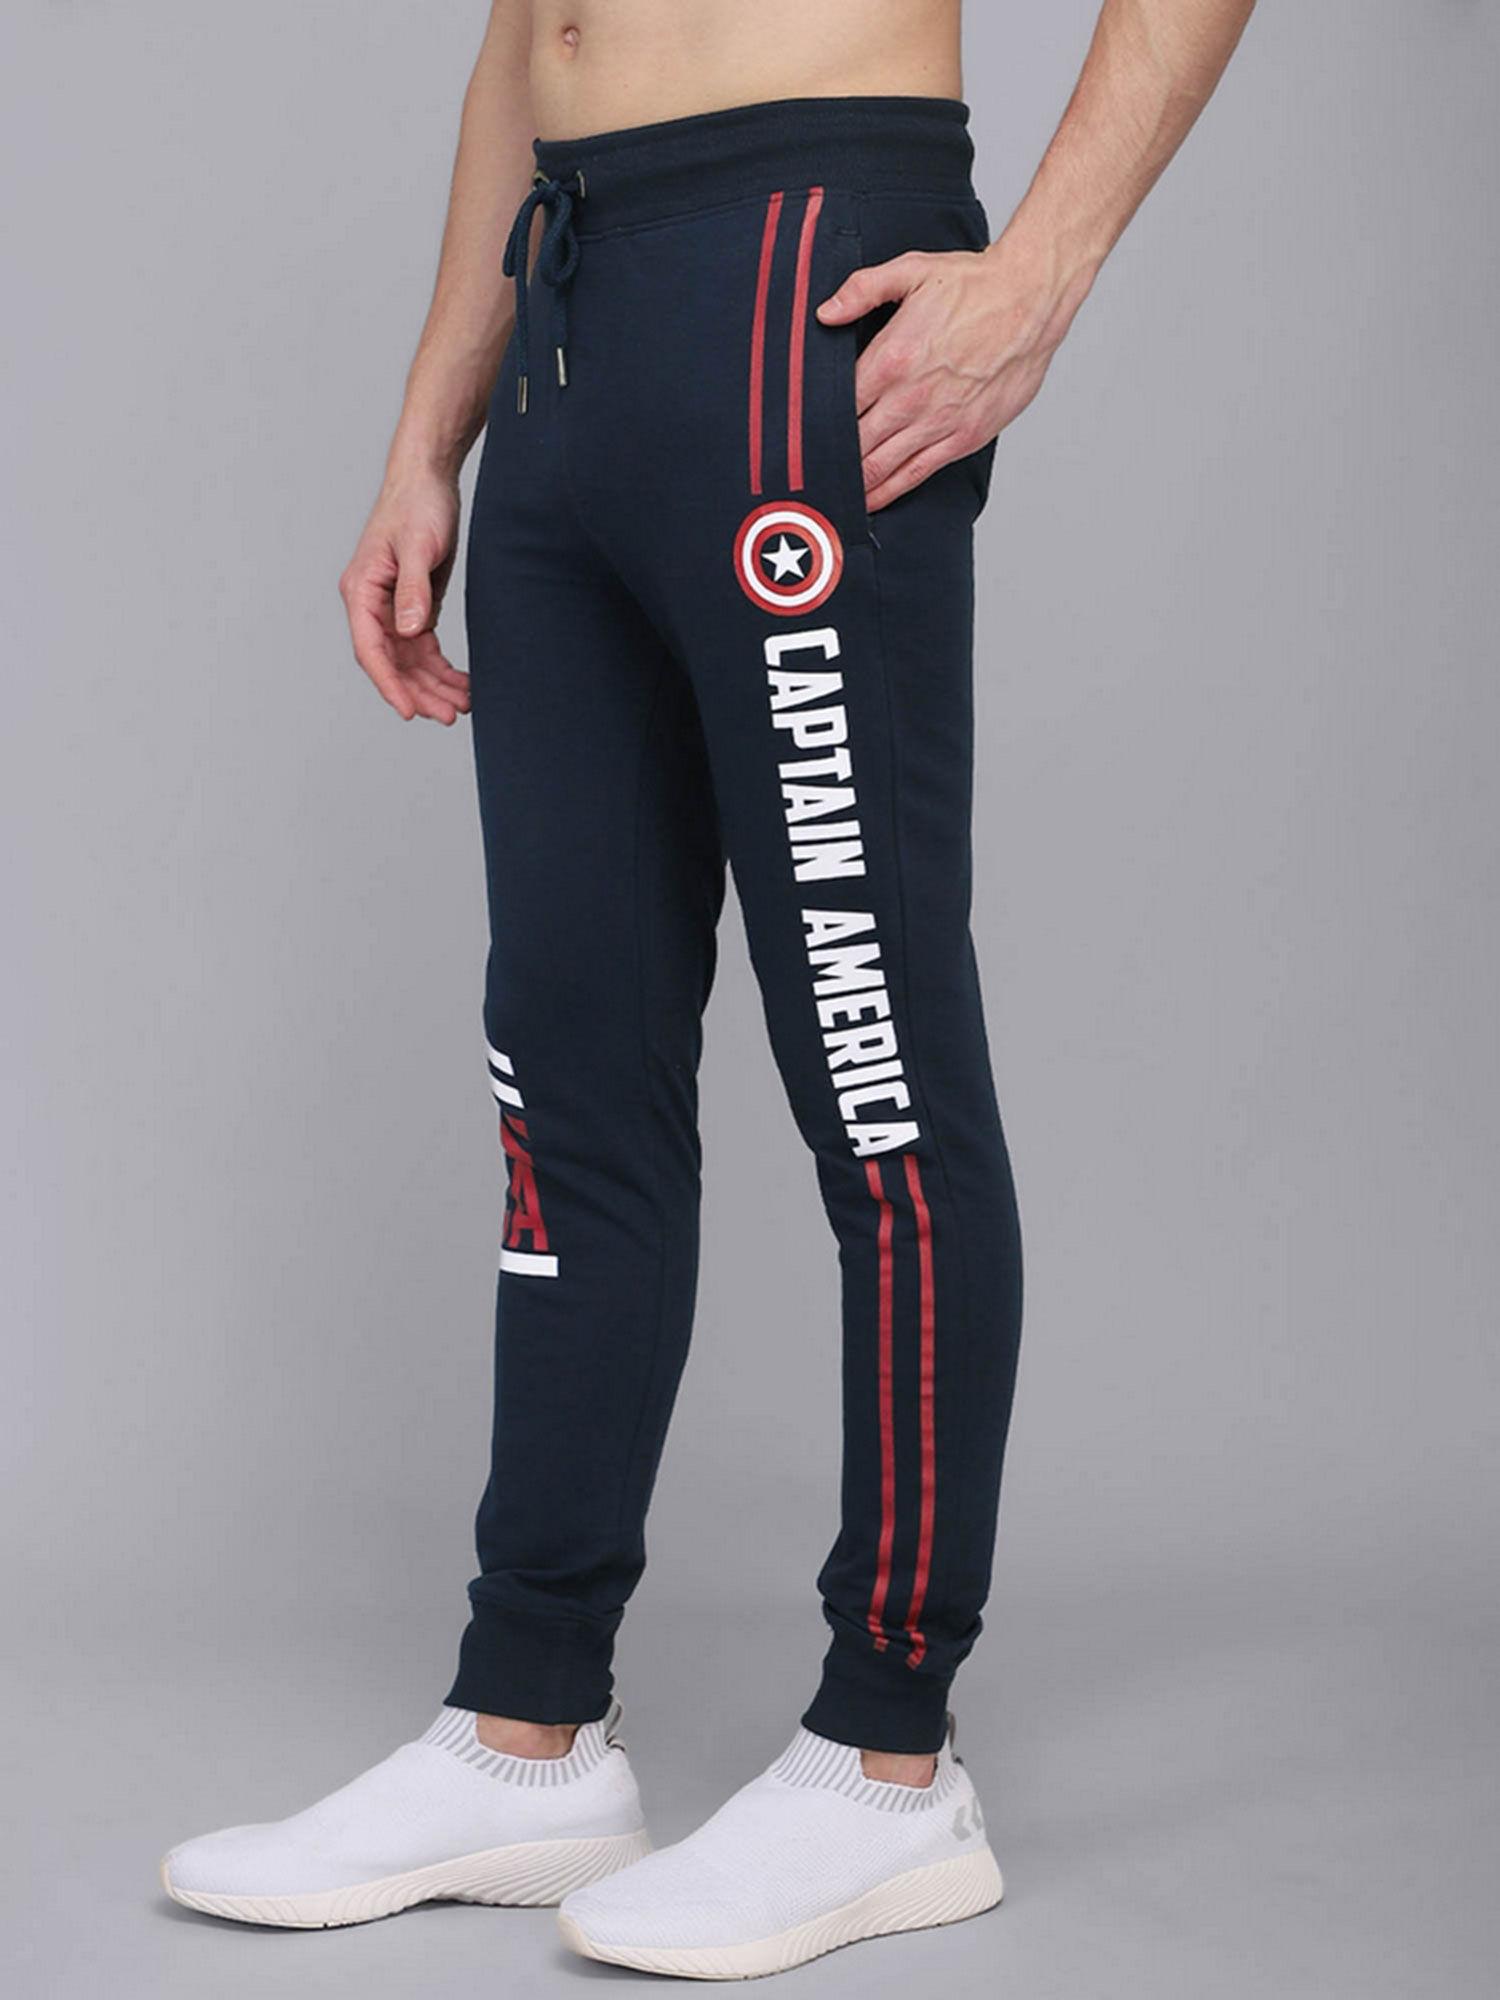 captain america featured joggers for men